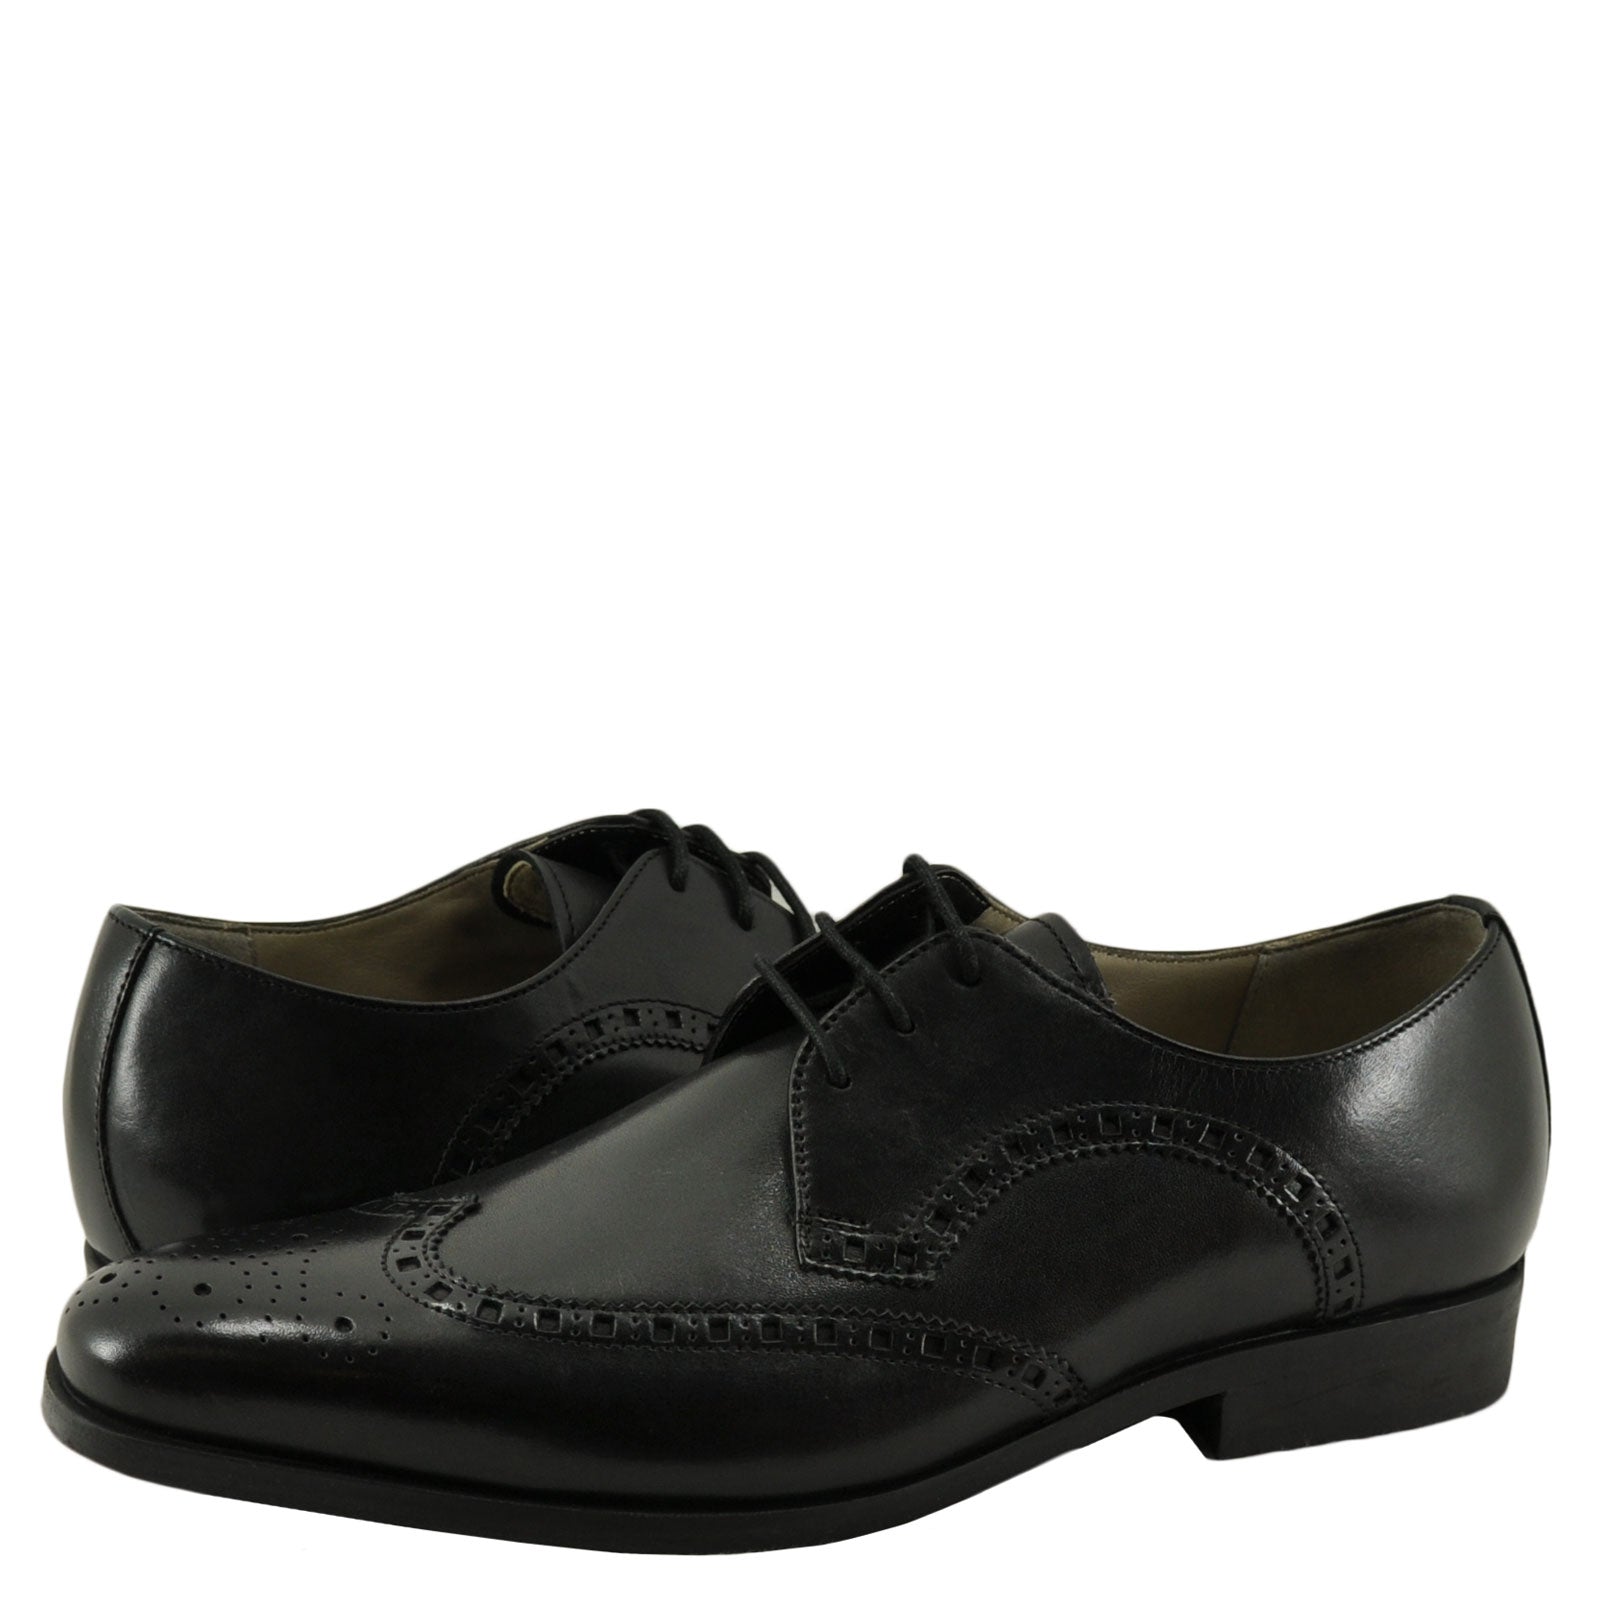 Clarks Amieson Limit – Milano Shoes